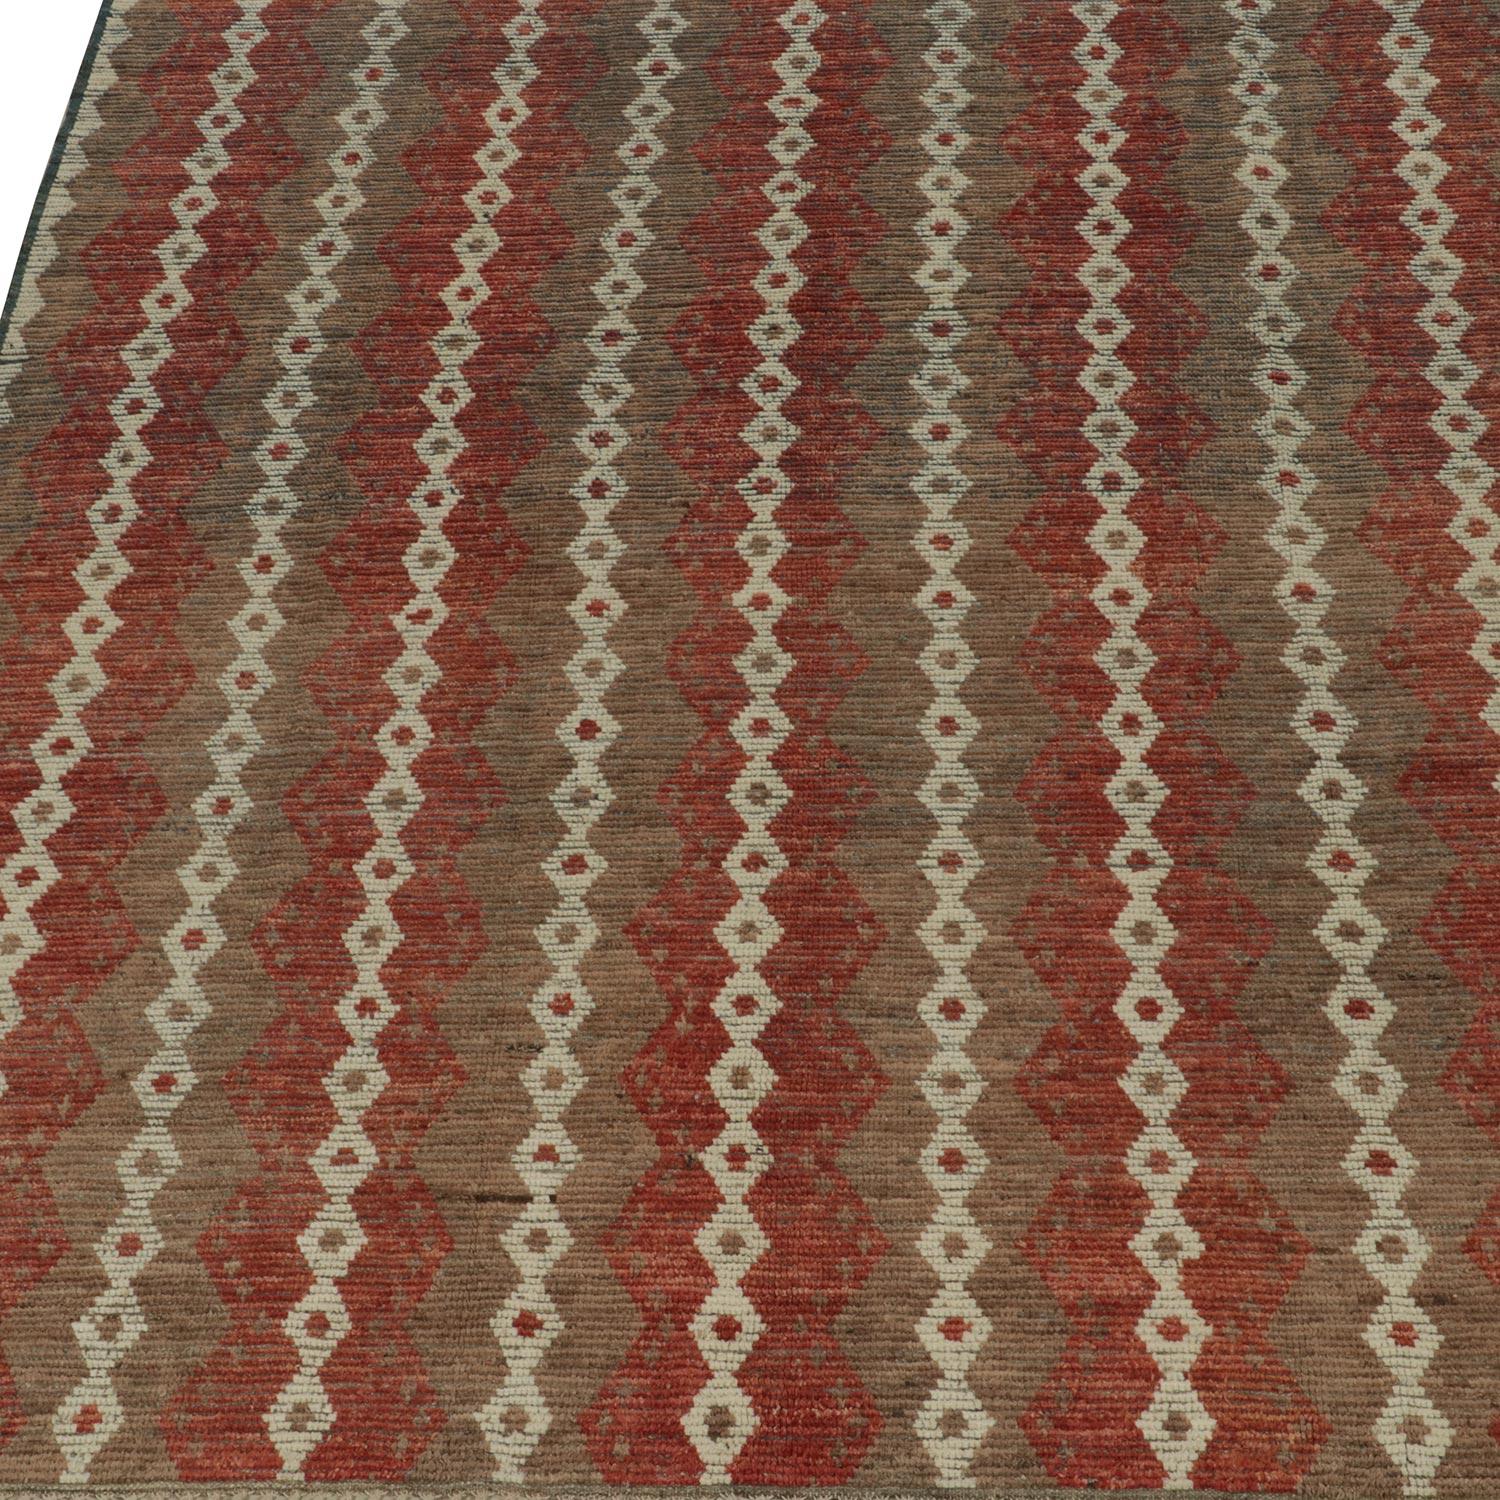 Hand-Knotted abc carpet Multi Moroccan Wool Rug - 8'3